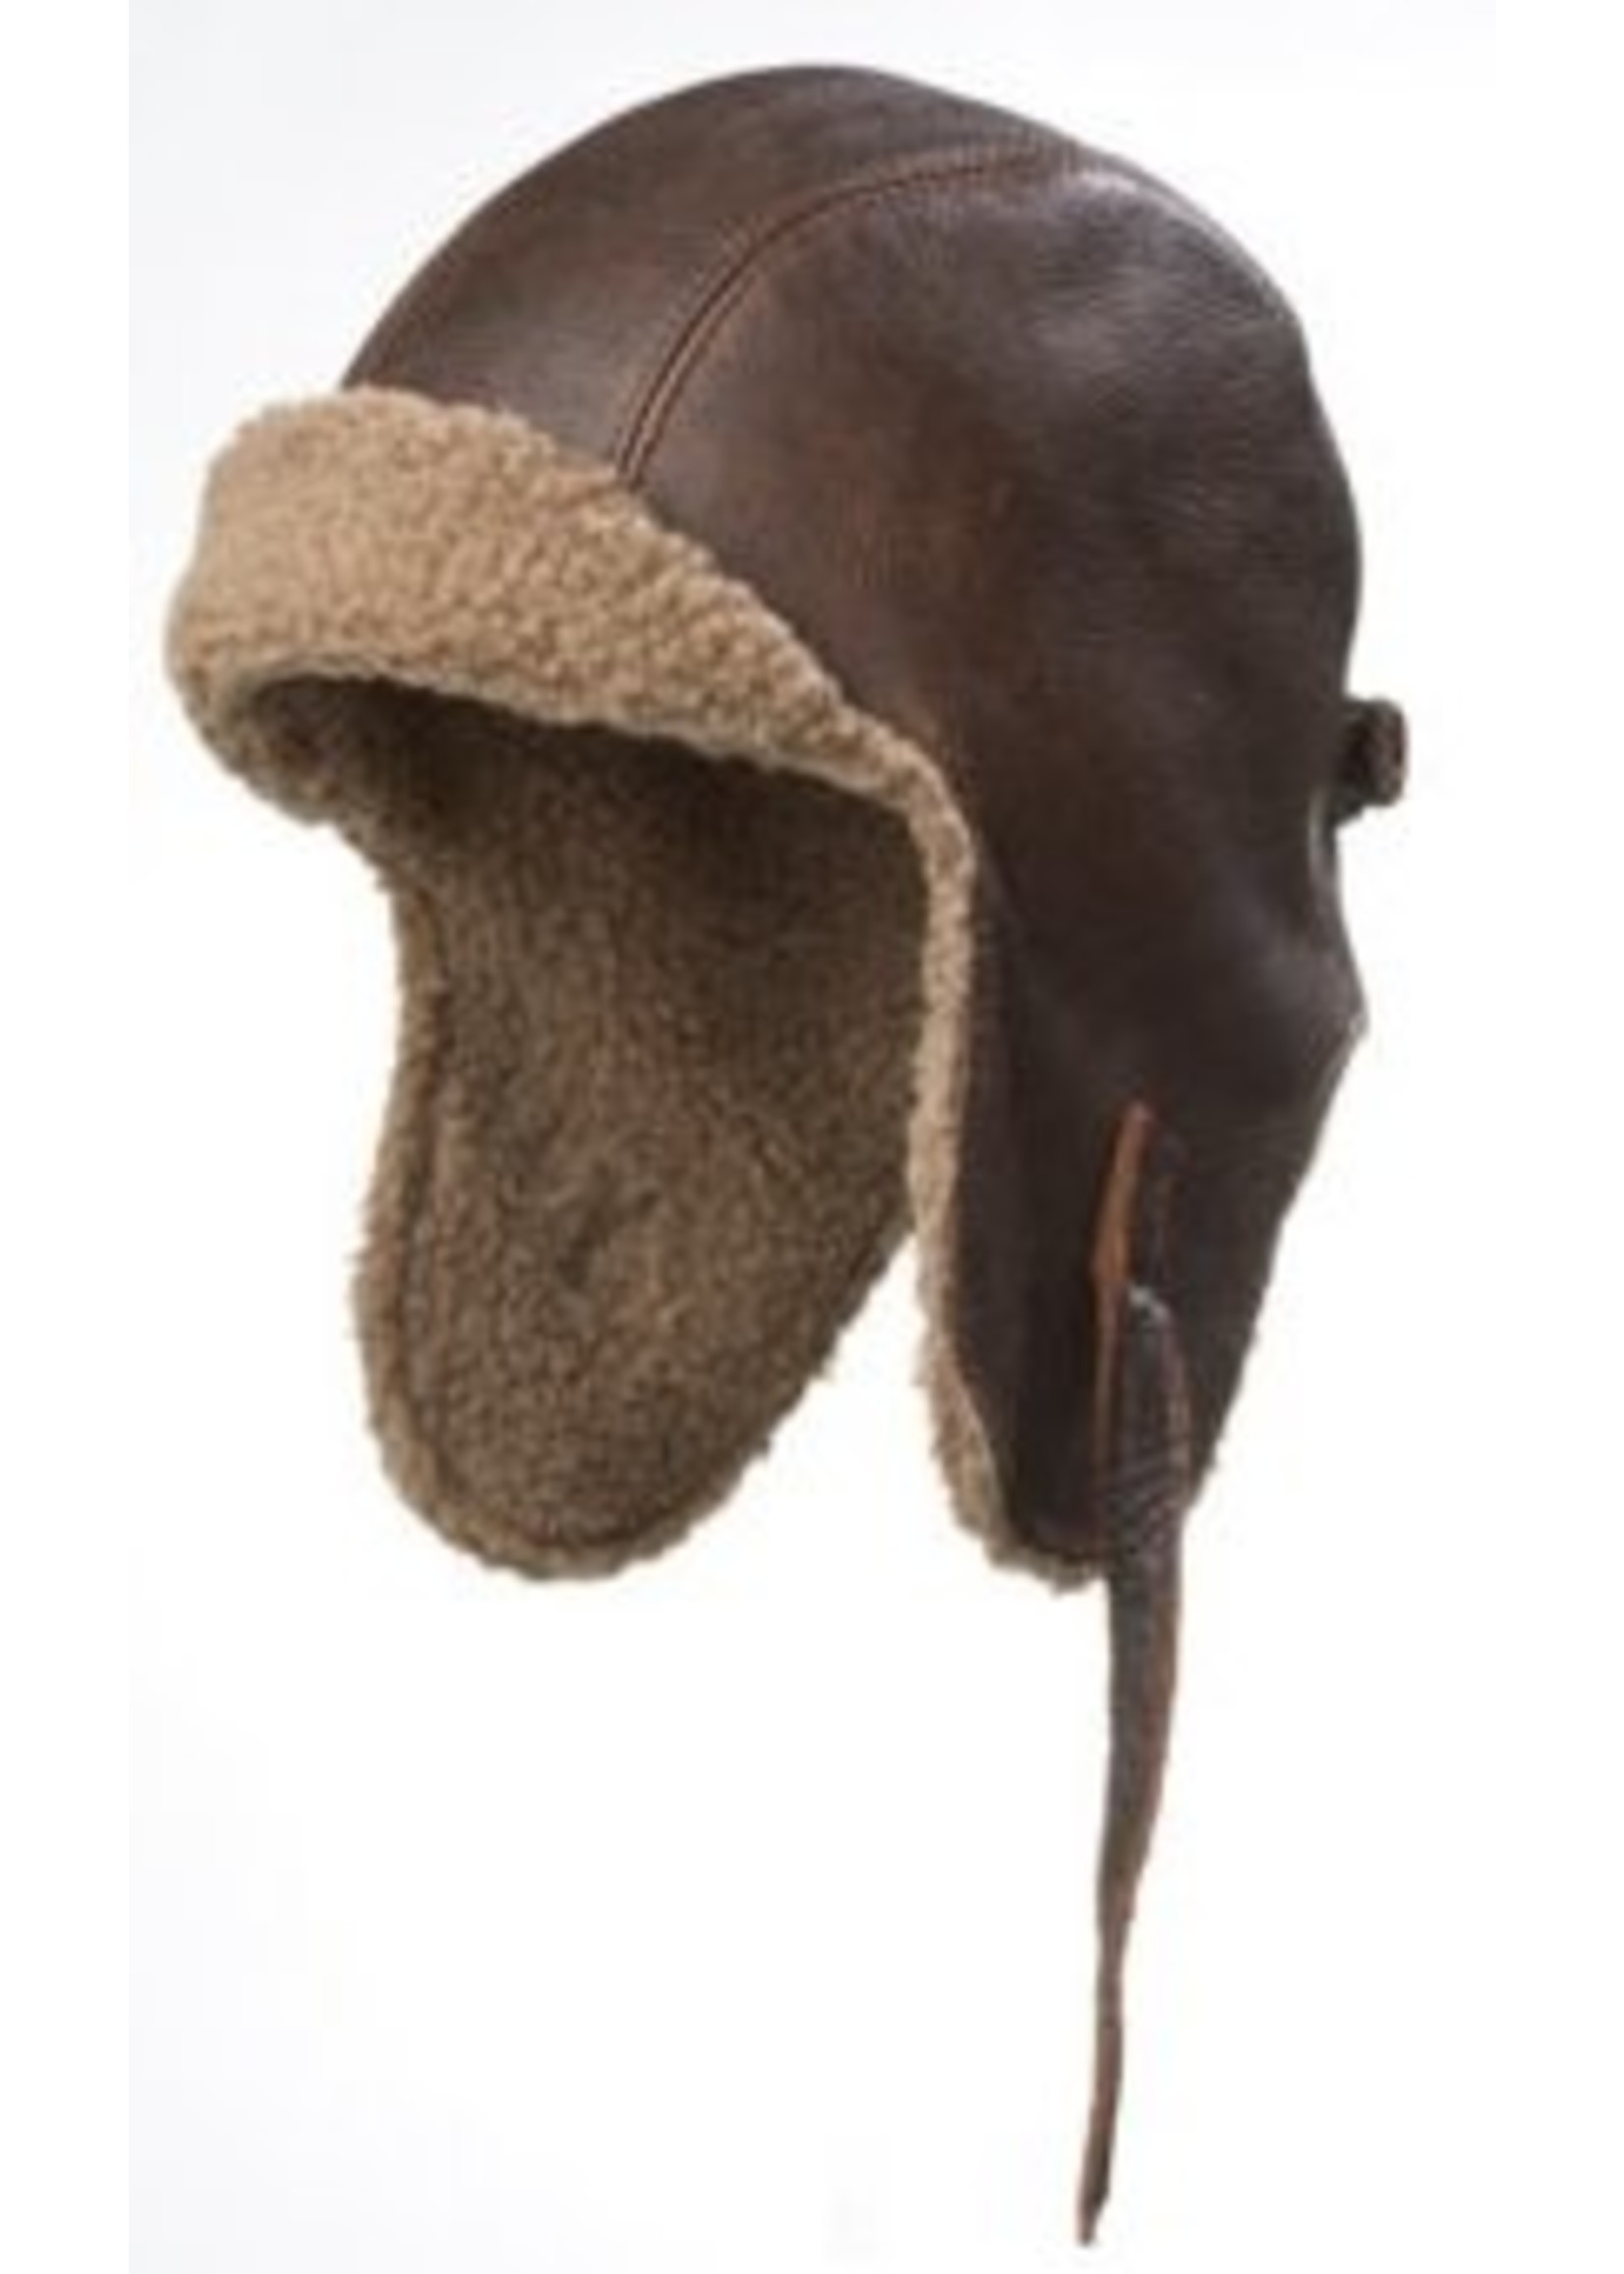 Vintage Leather Aviator Cap with Sherpa Trim